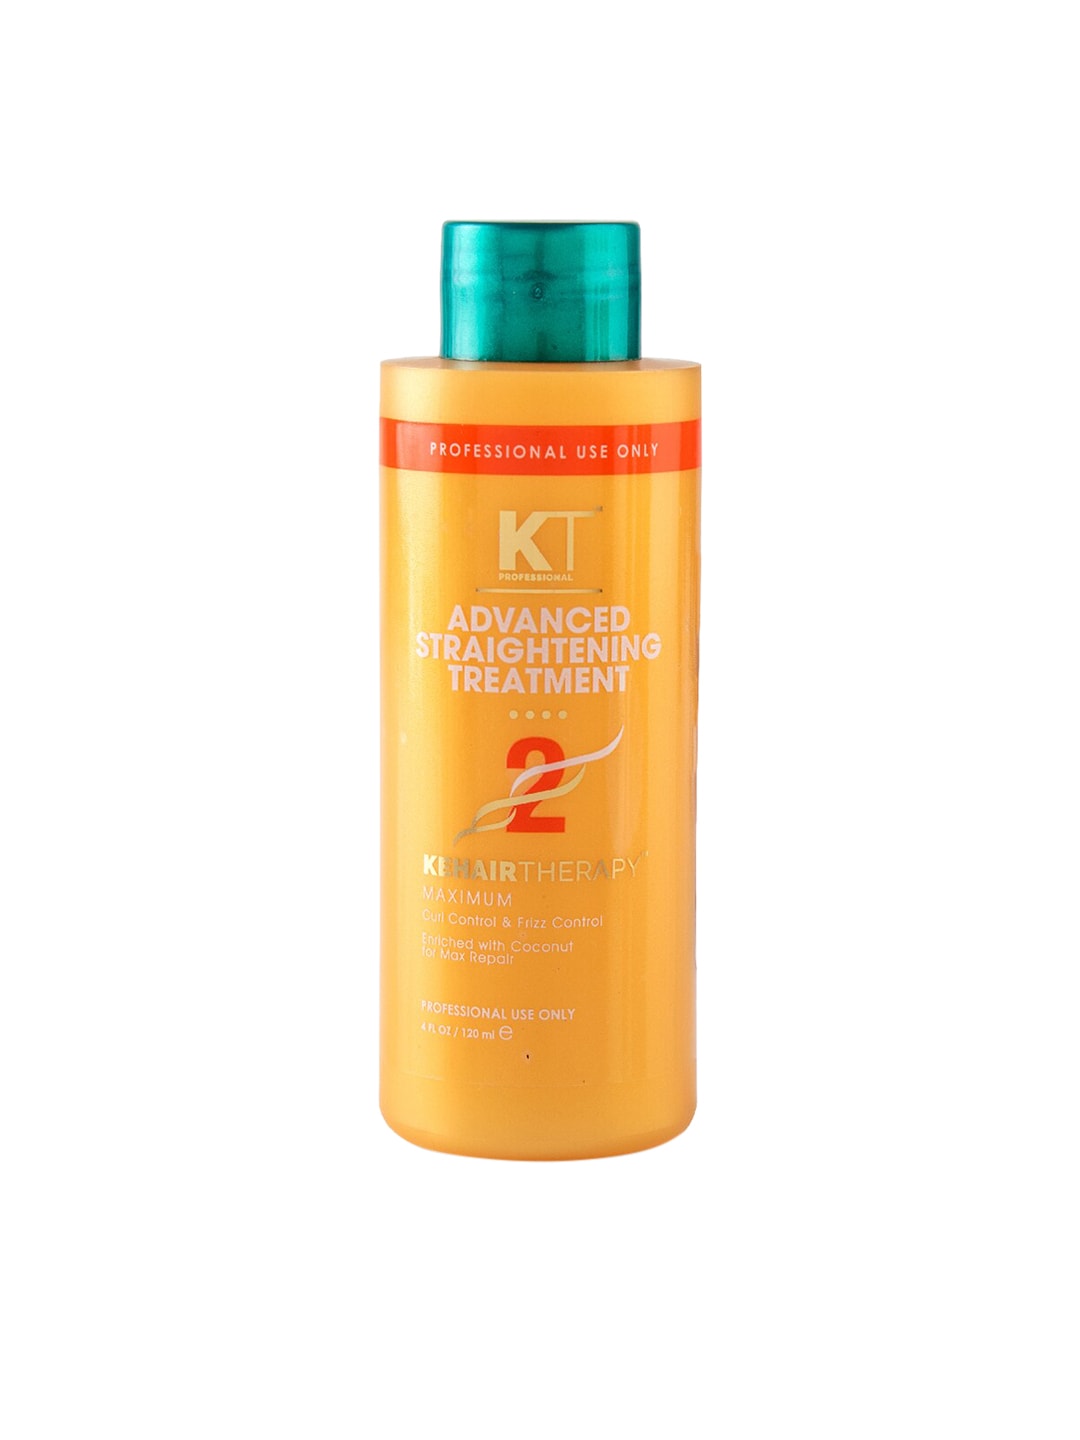 KEHAIRTHERAPY KT Professional Advanced Straightening Treatment - 120 ml Price in India